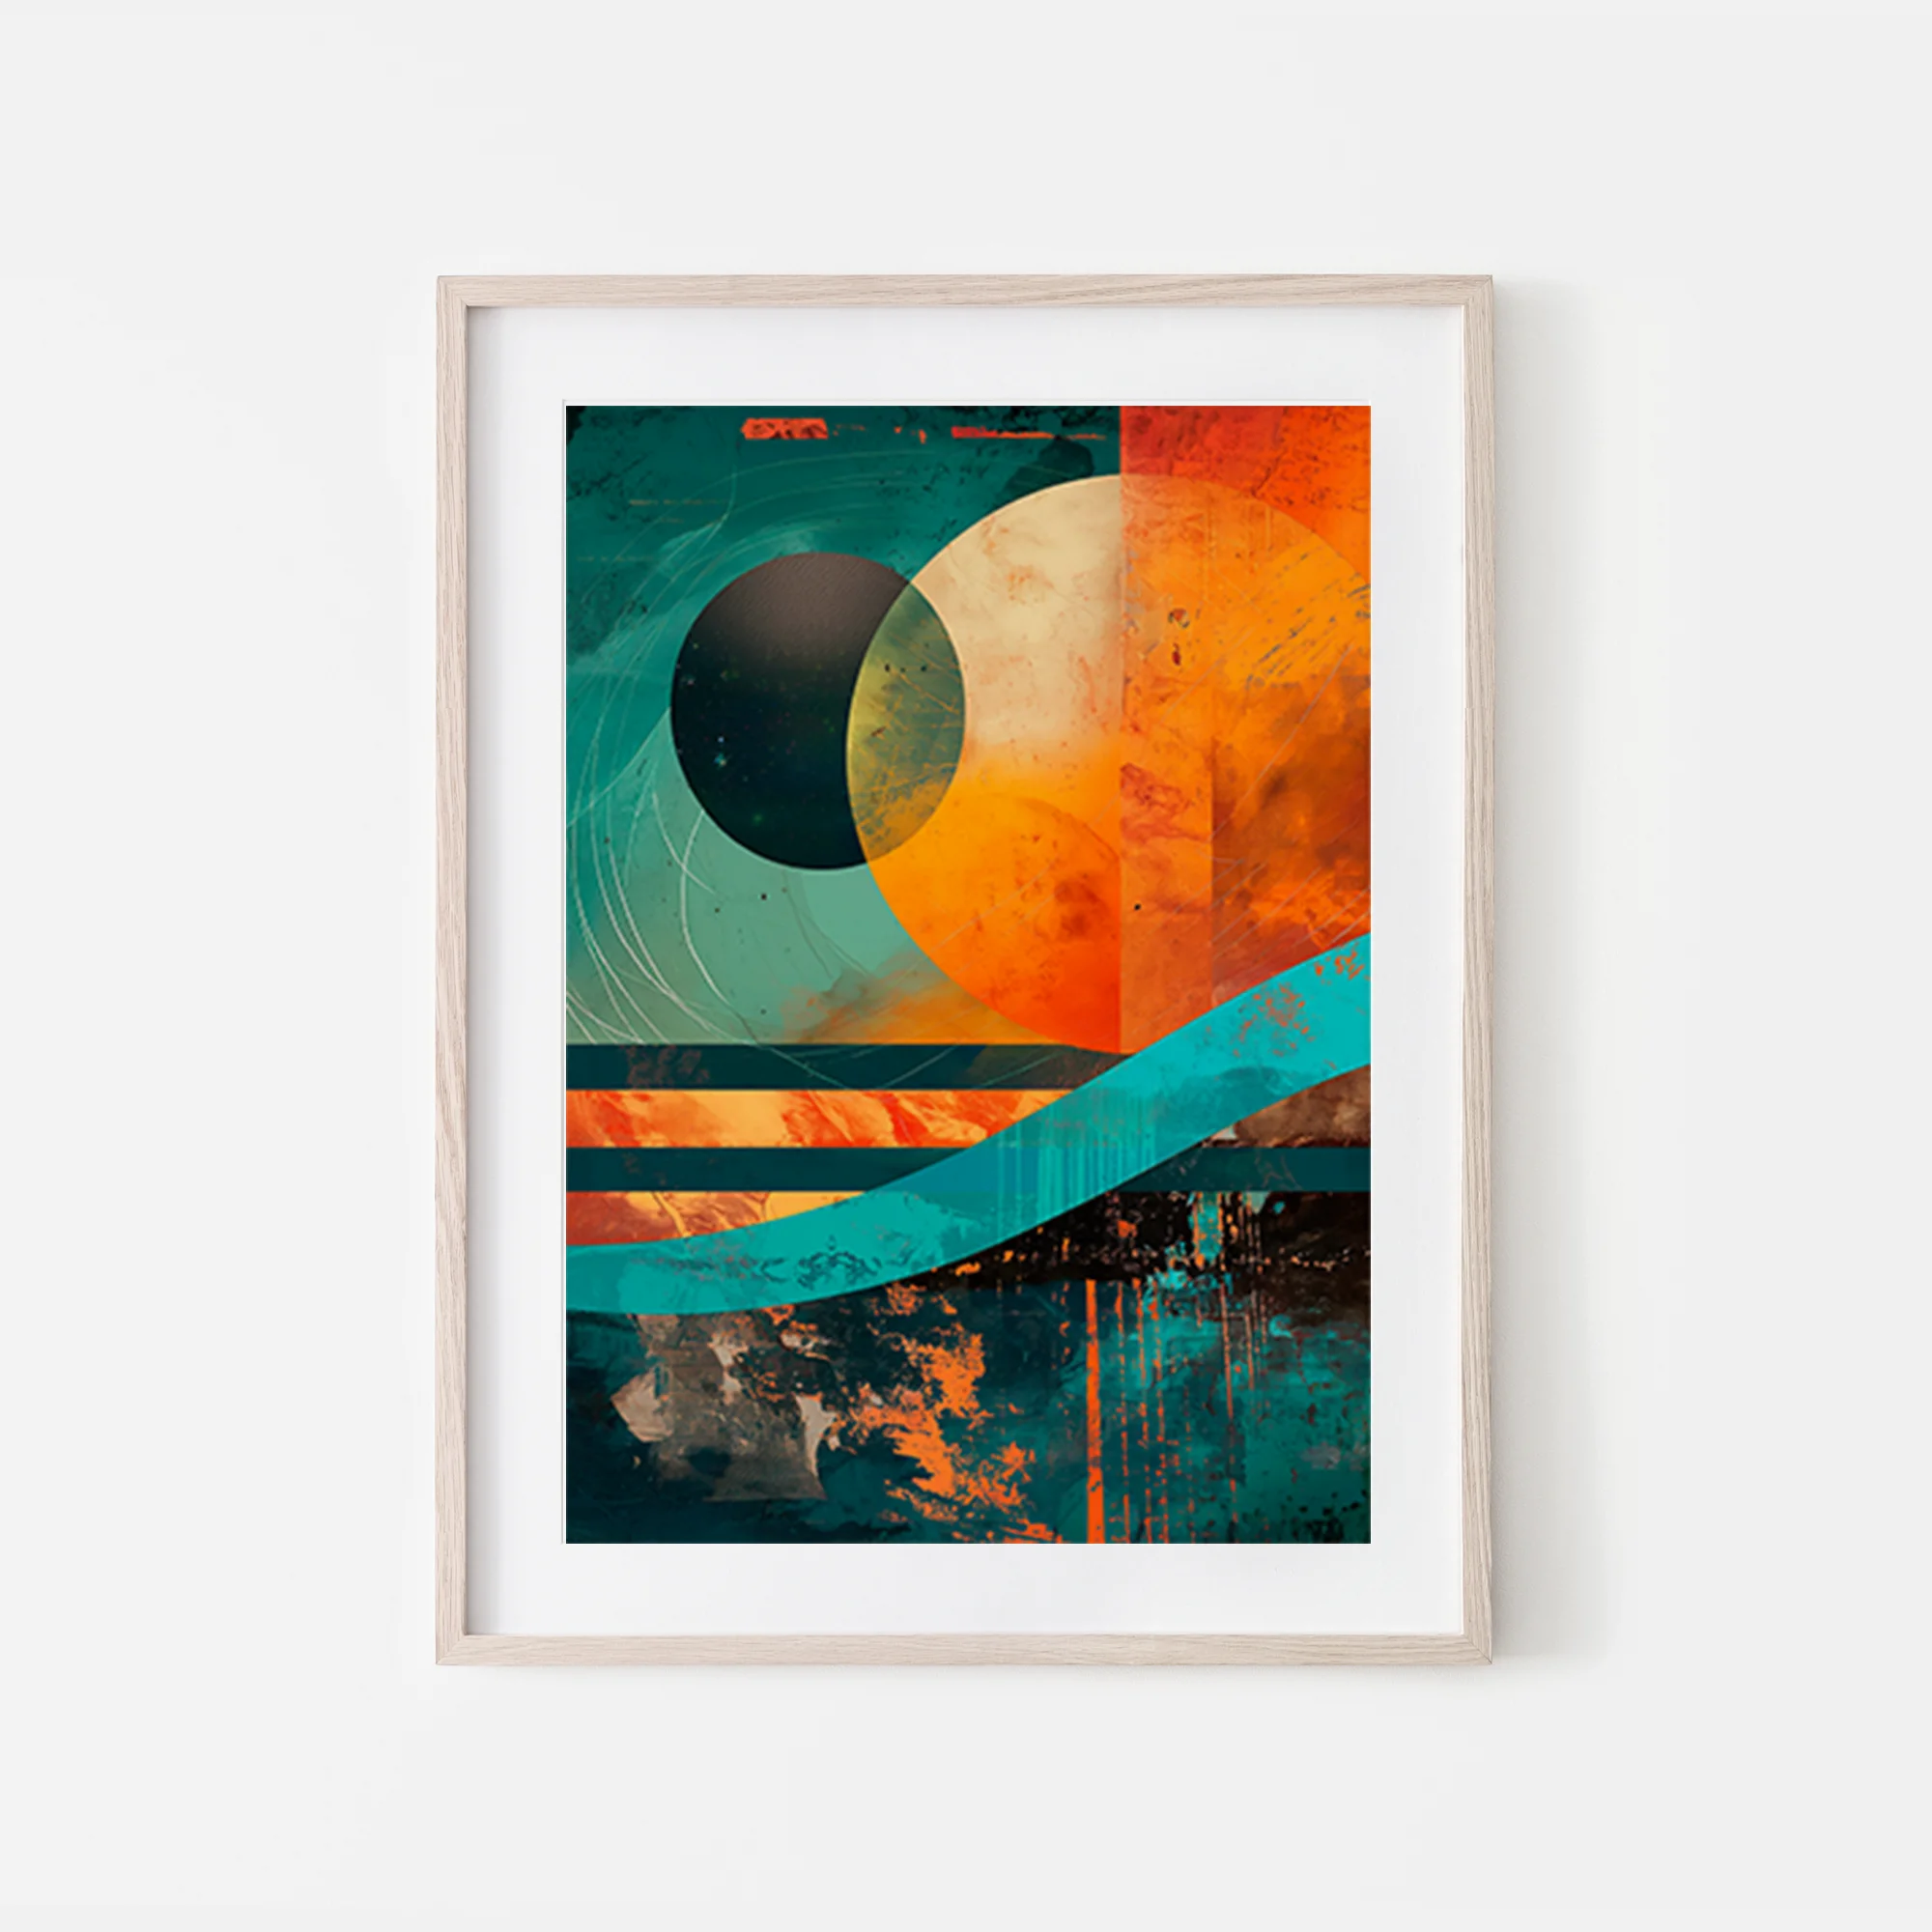 Geometric abstract art print in green teal orange and black colours